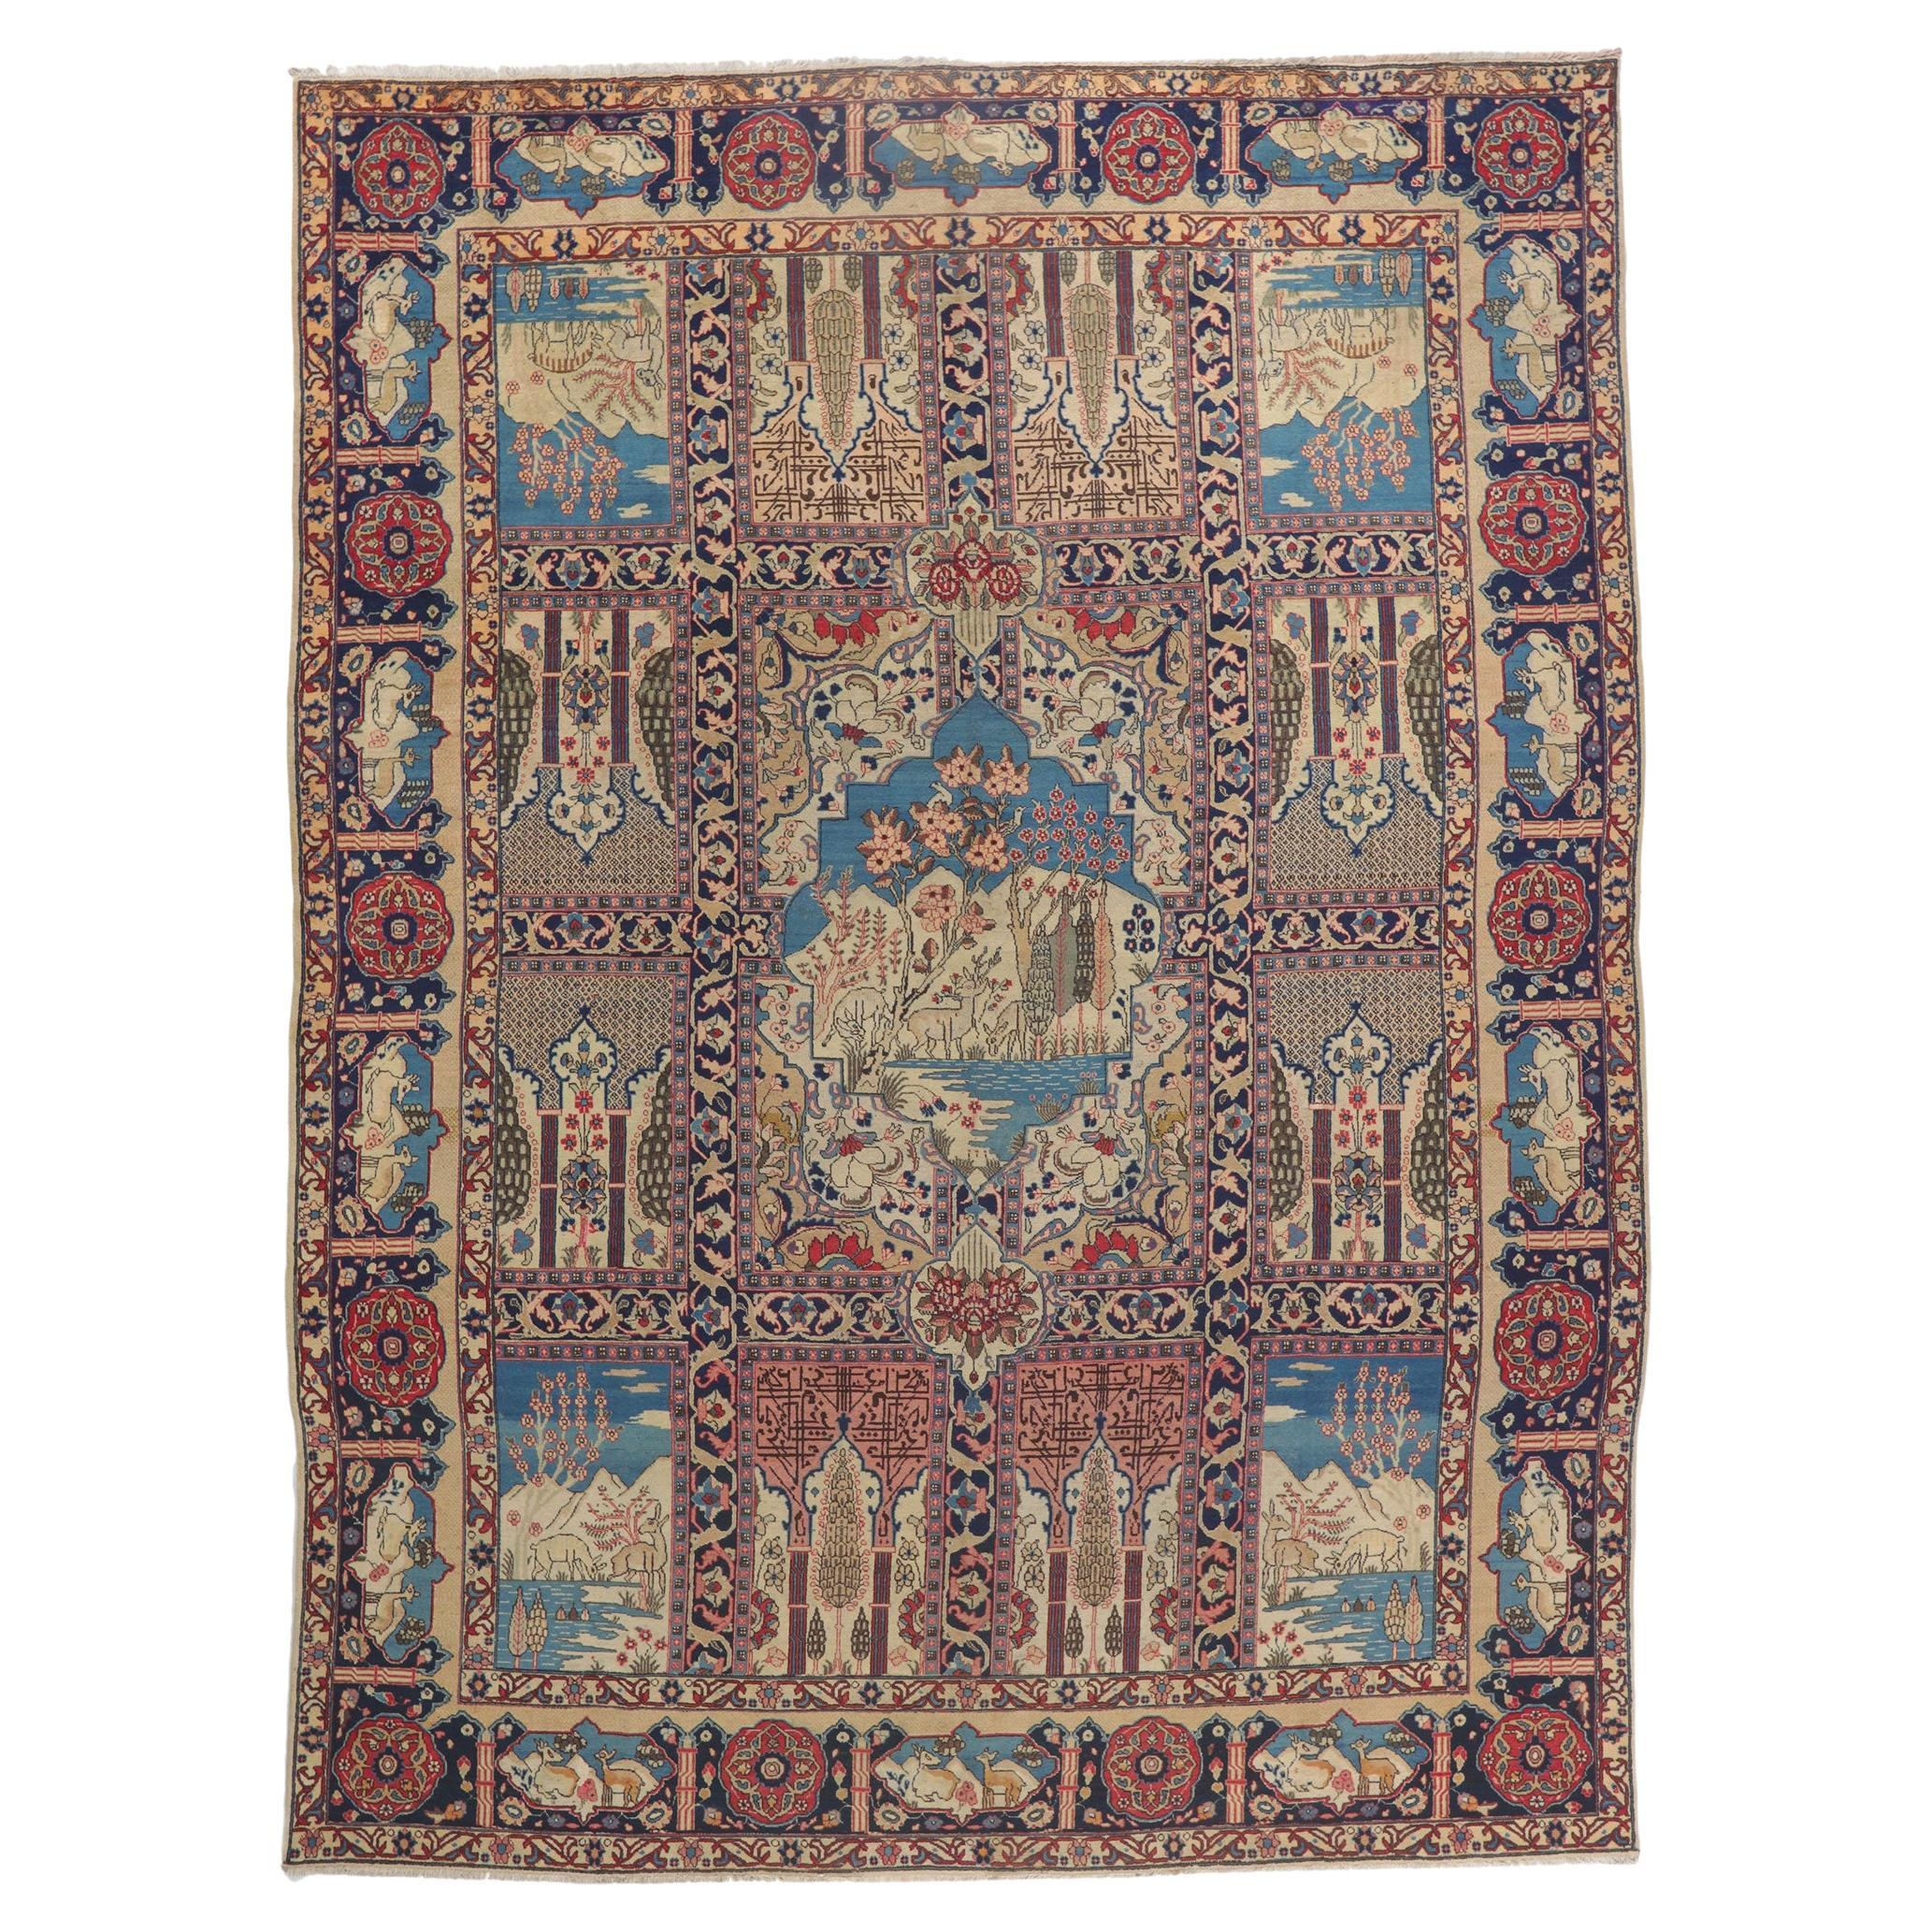 Antique Persian Tabriz Pictorial Rug with Garden Design For Sale